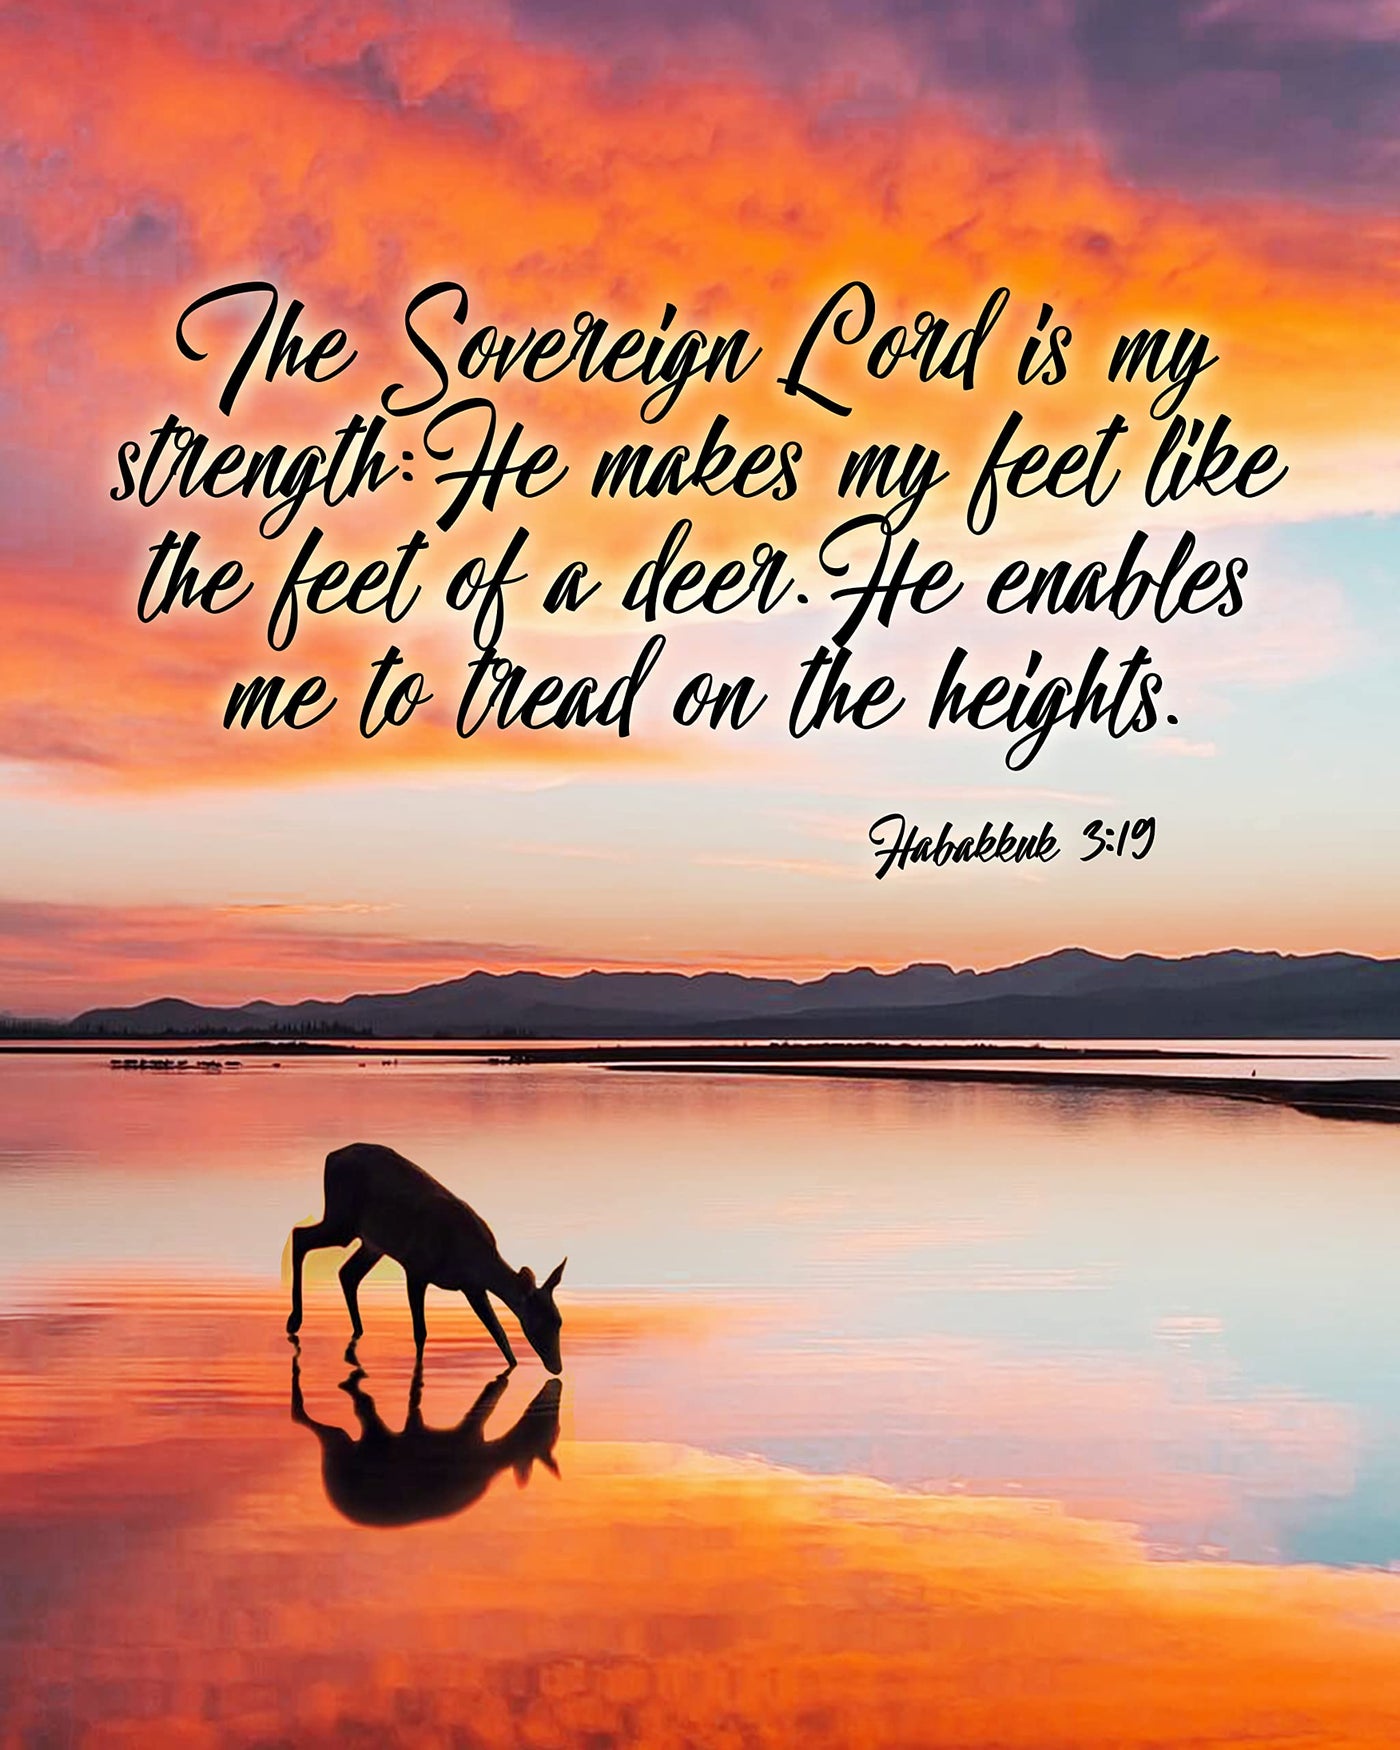 The Sovereign Lord Is My Strength-Bible Verse Wall Art -8x10" Inspirational Beach Sunset Scripture Print-Ready to Frame. Christian Decor for Home-Office-Church. Great Religious Gift! Habakkuk 3:19